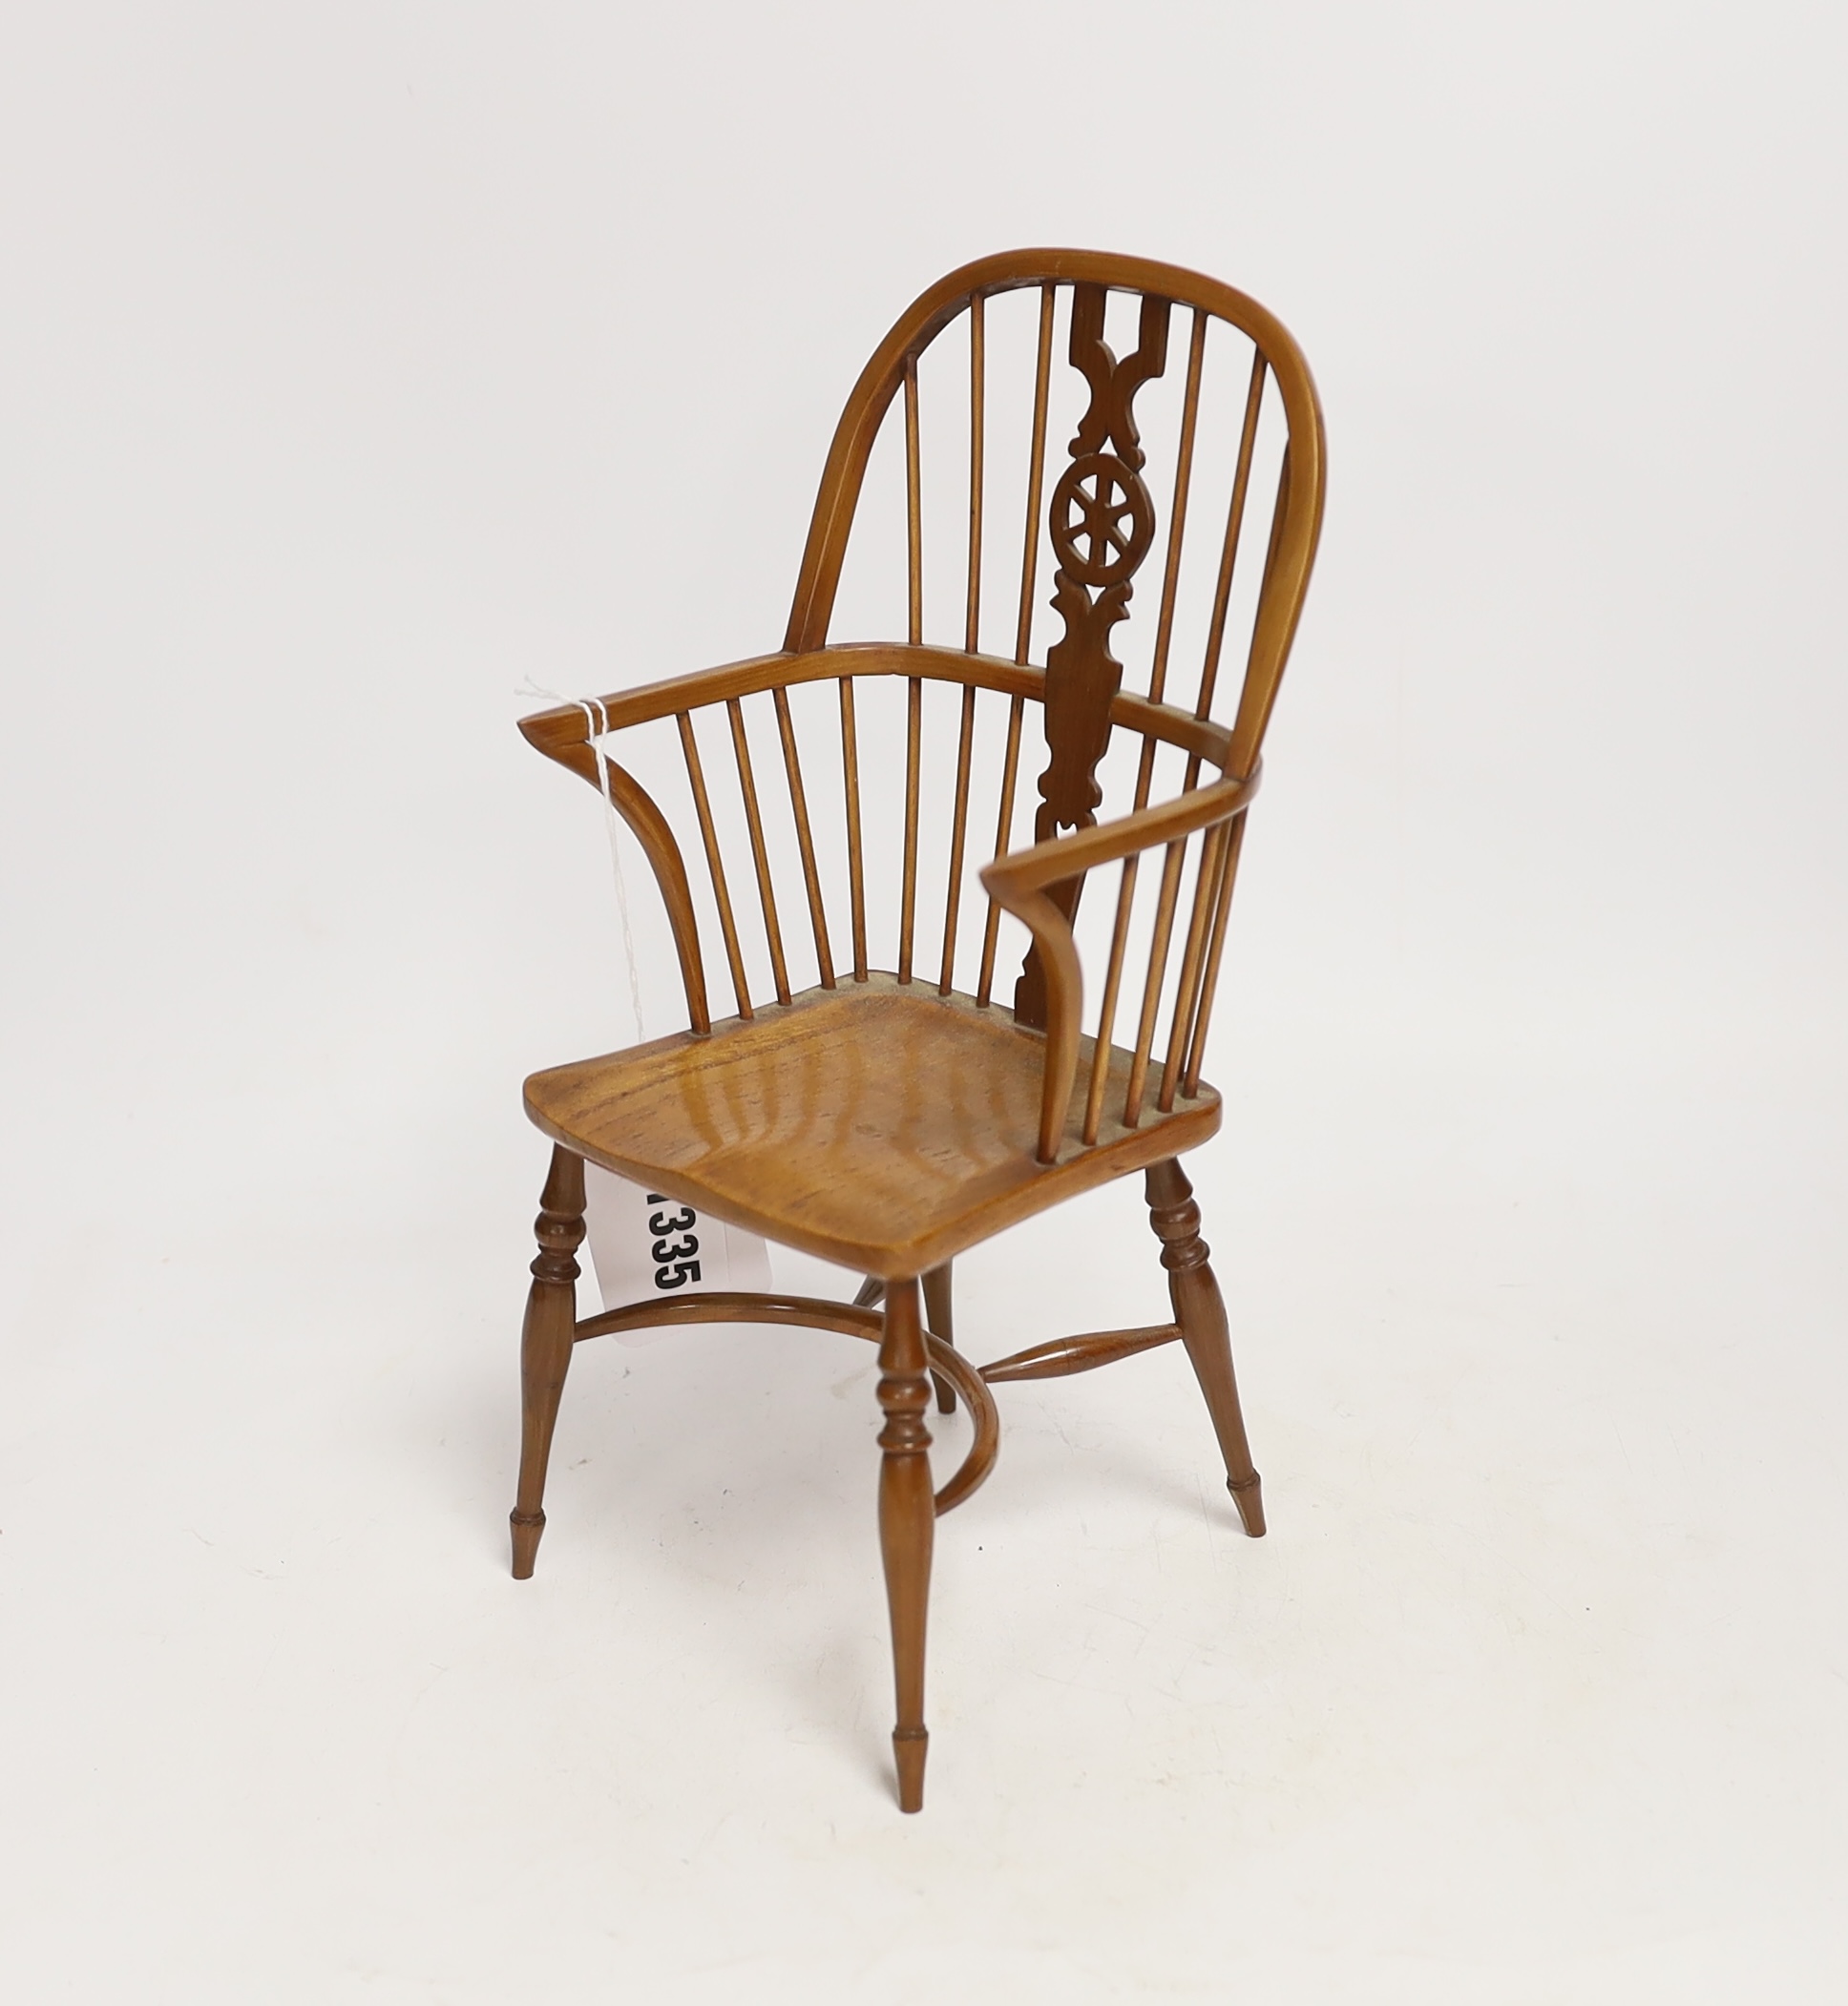 A Stuart King model of a Windsor chair, dated 1976, 27cm